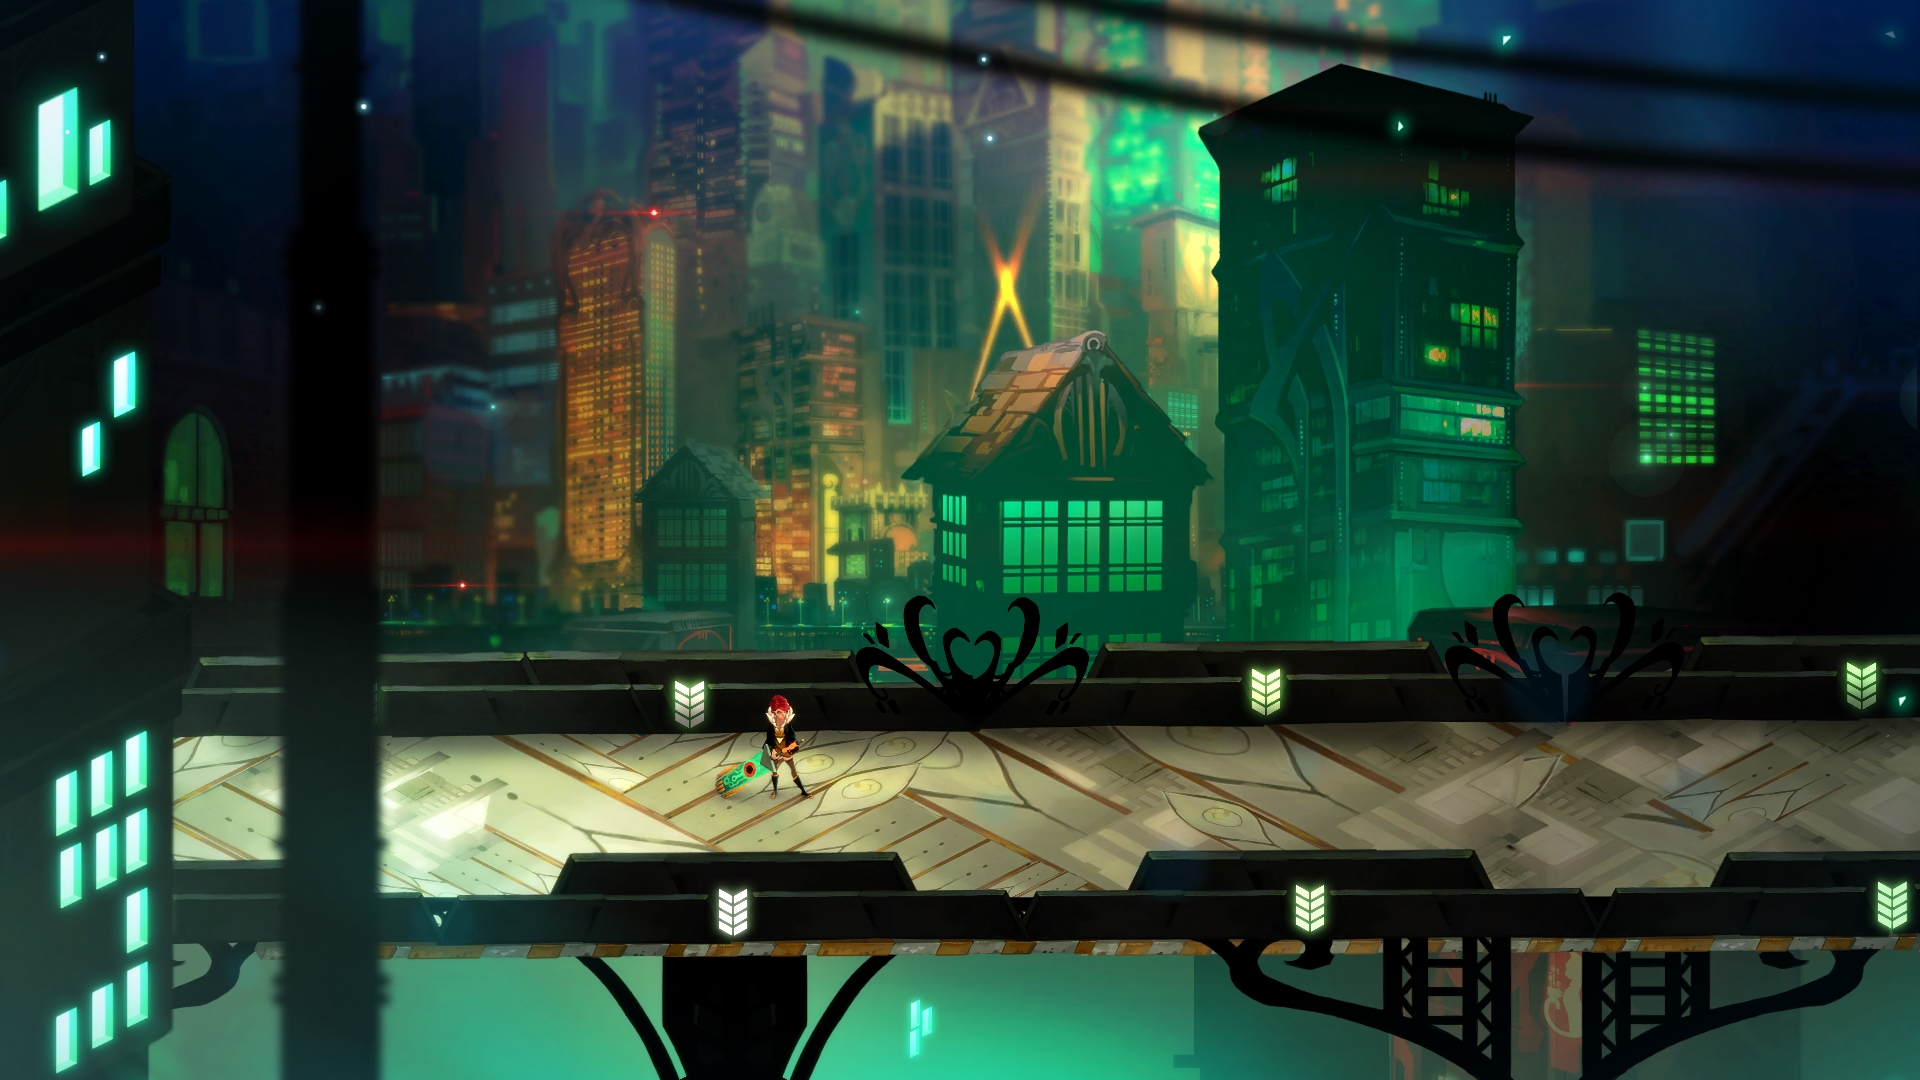 Free download TRANSISTOR game anime city g wallpaper background [1920x1080] for your Desktop, Mobile & Tablet. Explore Anime Gamer Wallpaper. Anime Wallpaper Sites, Free Anime Wallpaper for Laptops, Cool